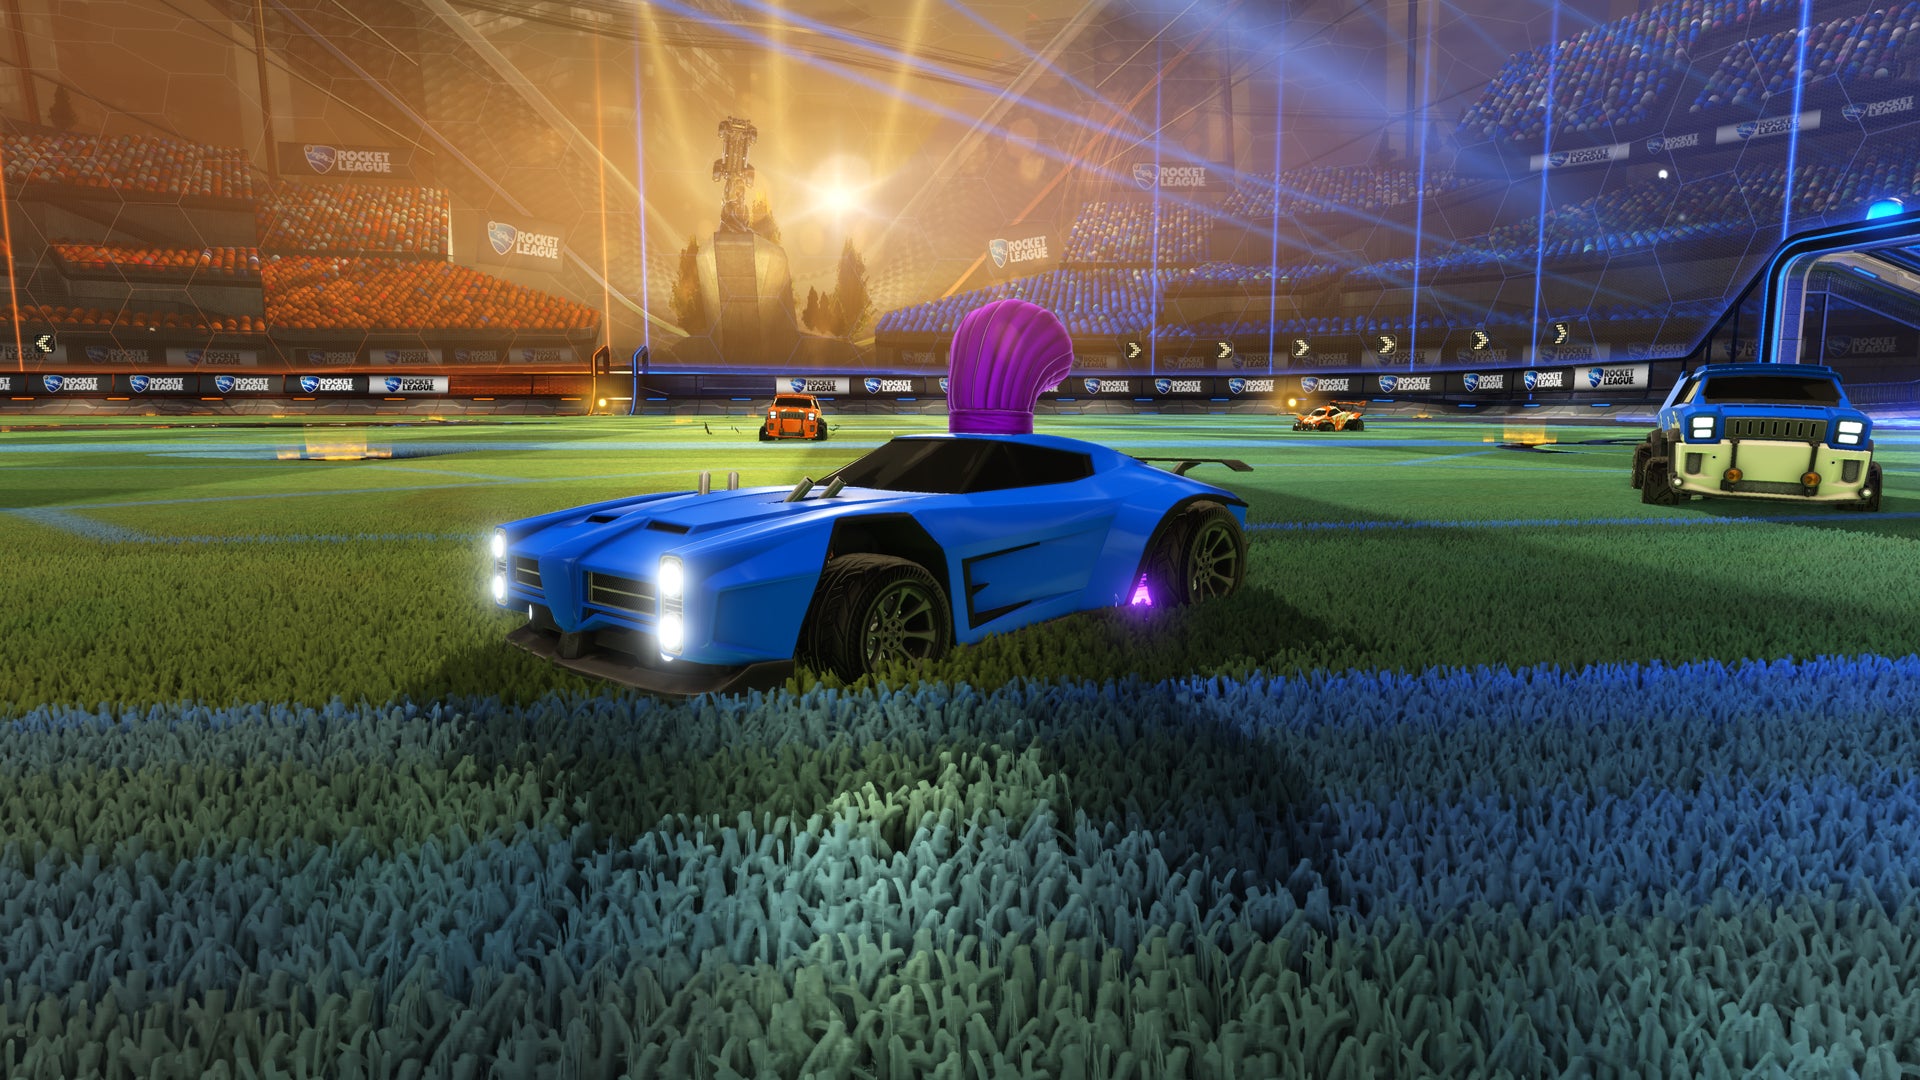 New Painted Items Dropping <br> in Rumble Update Image